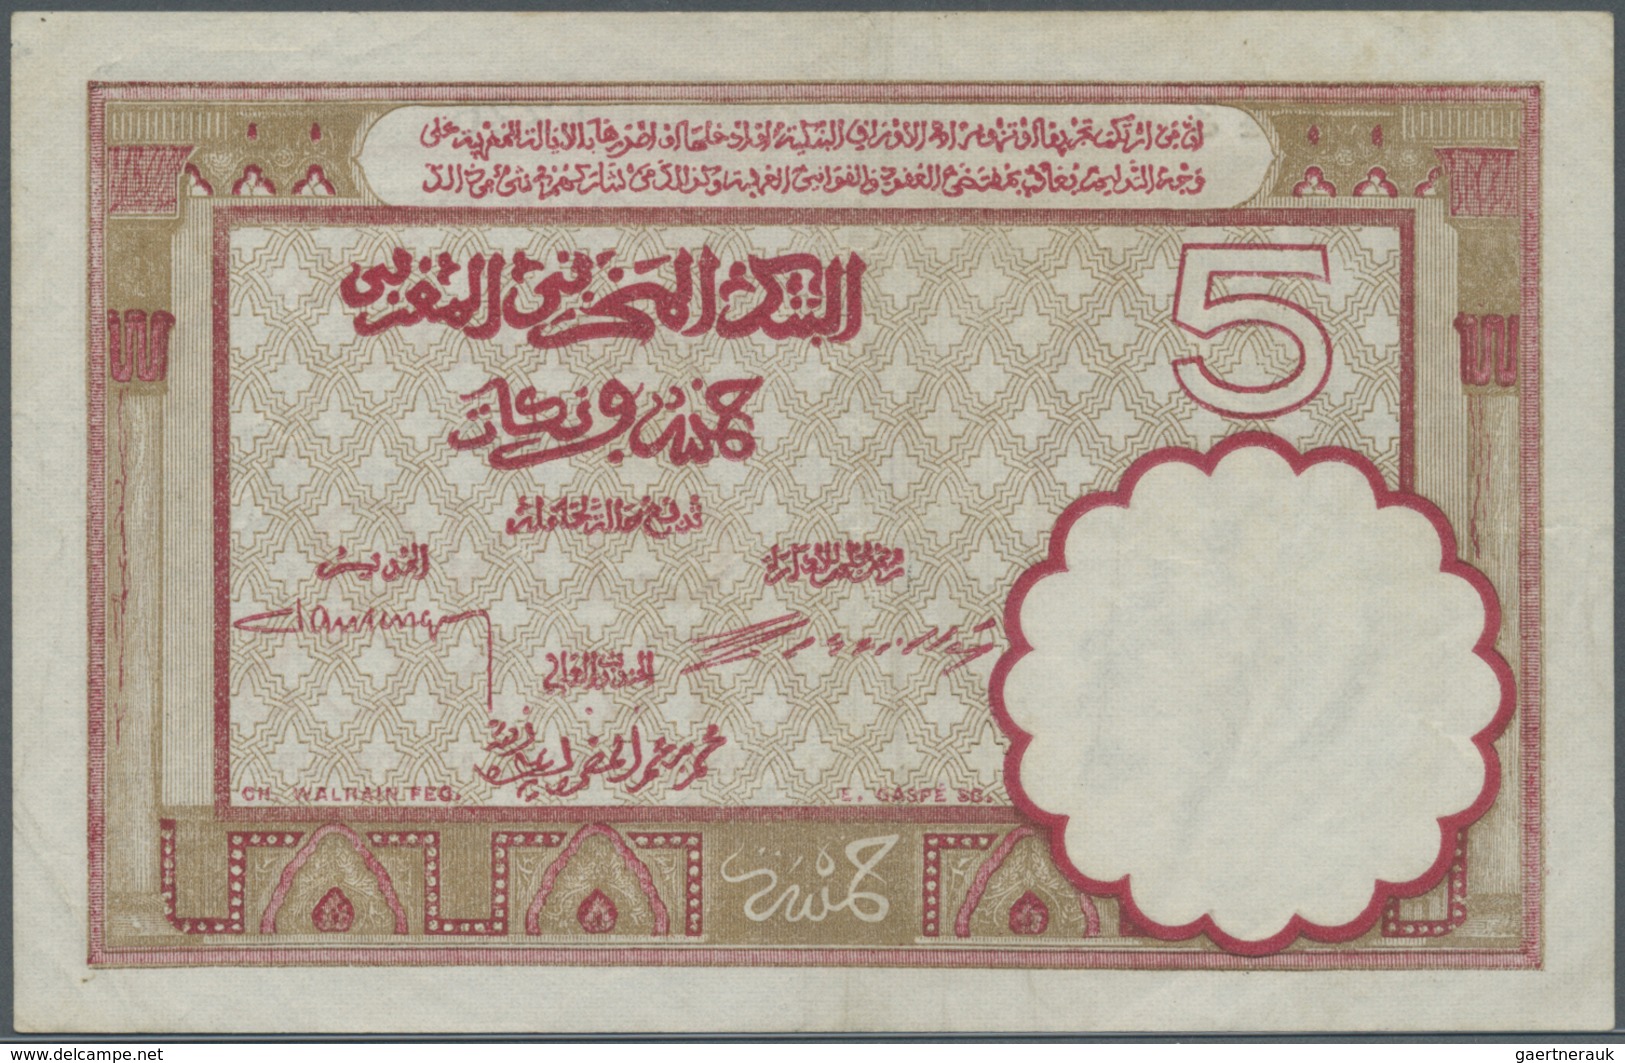 Morocco / Marokko: 5 Francs 1922 P. 23Aa, Light Handling And Light Folds In Paper, No Holes Or Tears - Morocco